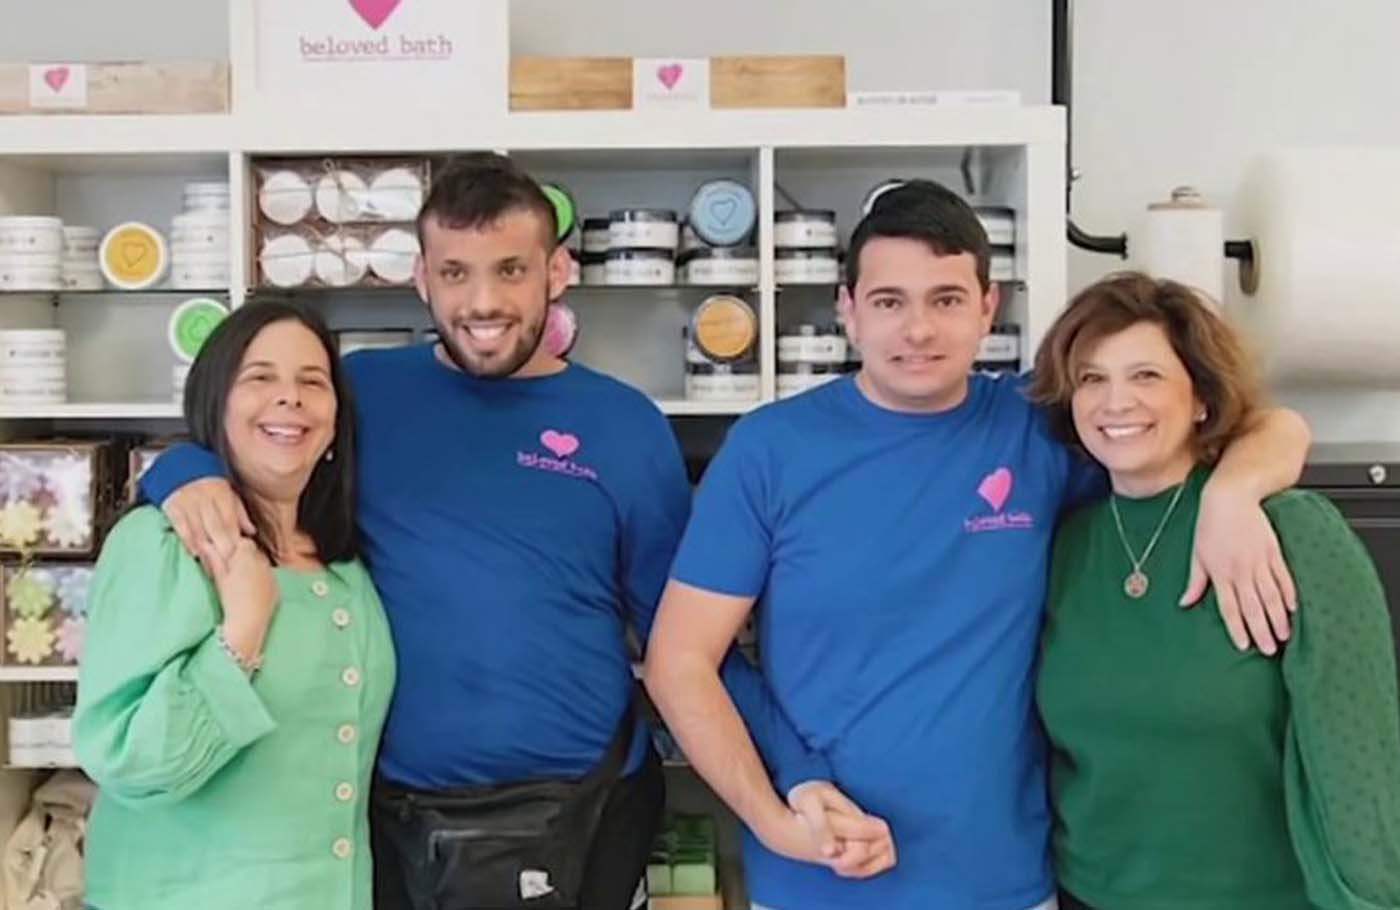 NJ business helps the unemployed living on autism spectrum